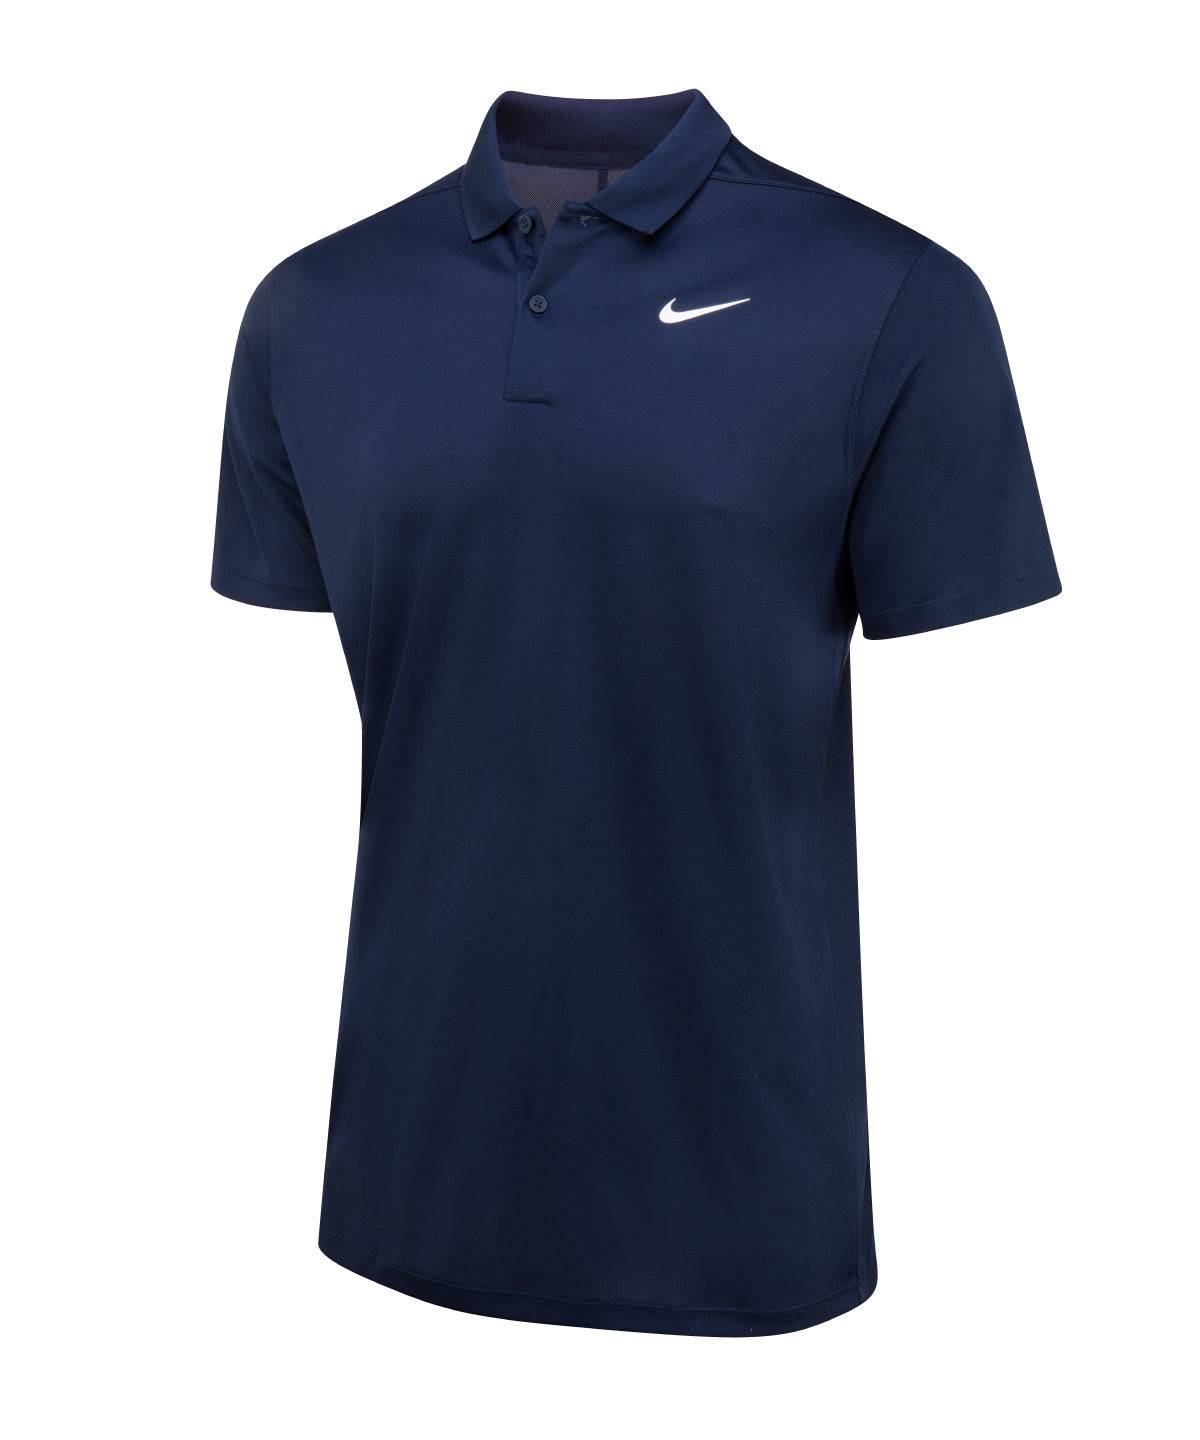 Obsidian/White - Nike Dri-FIT victory solid polo